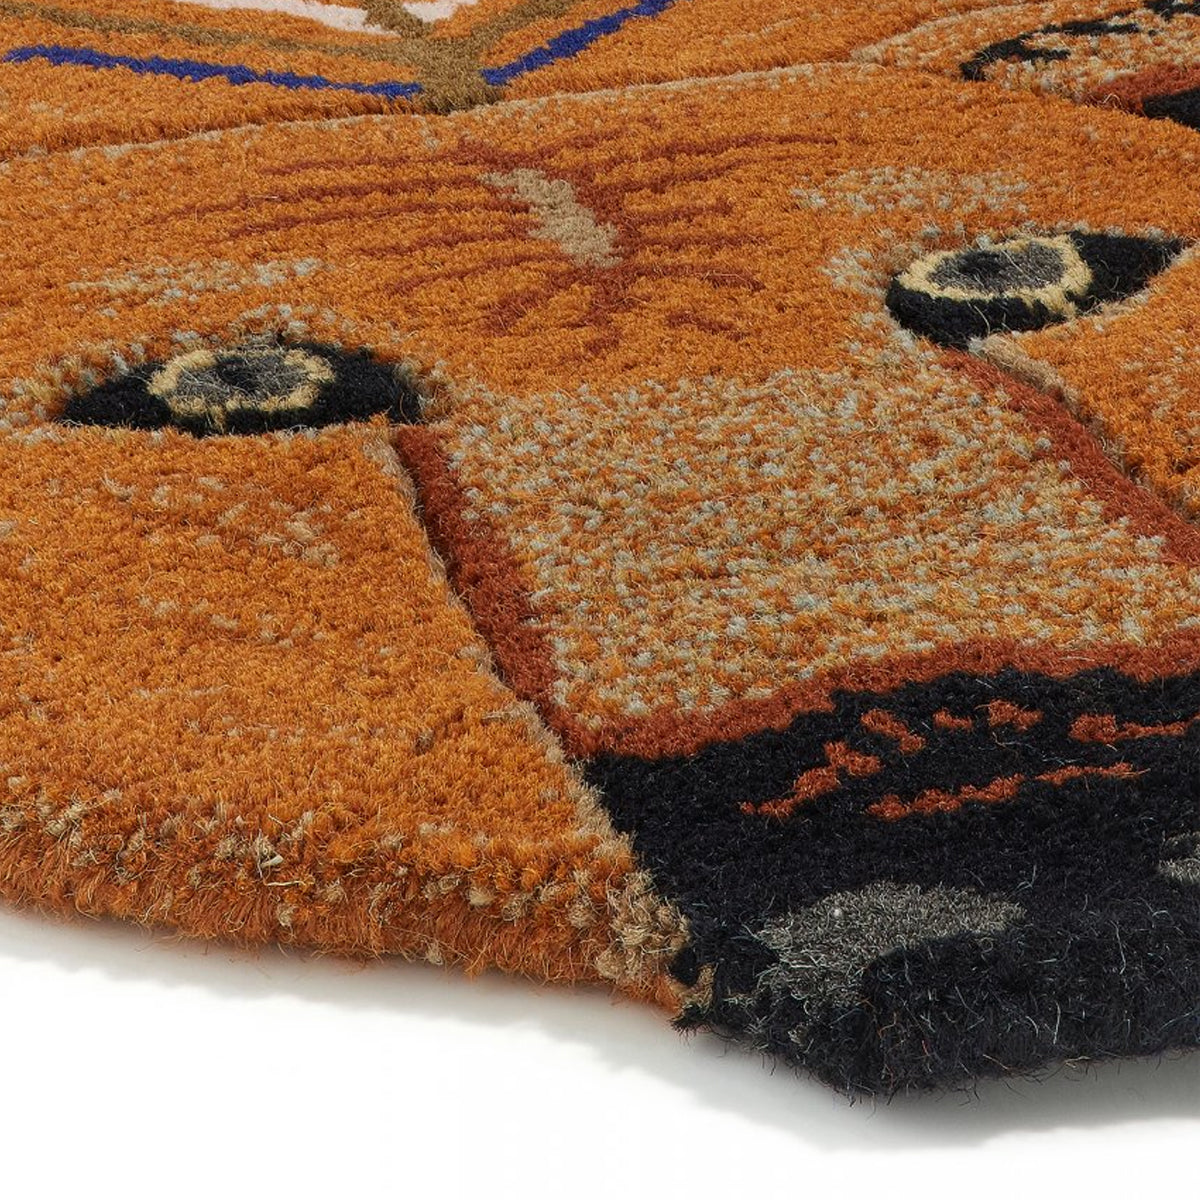 Berber Grizzly Bear Rug Large - Doing Goods